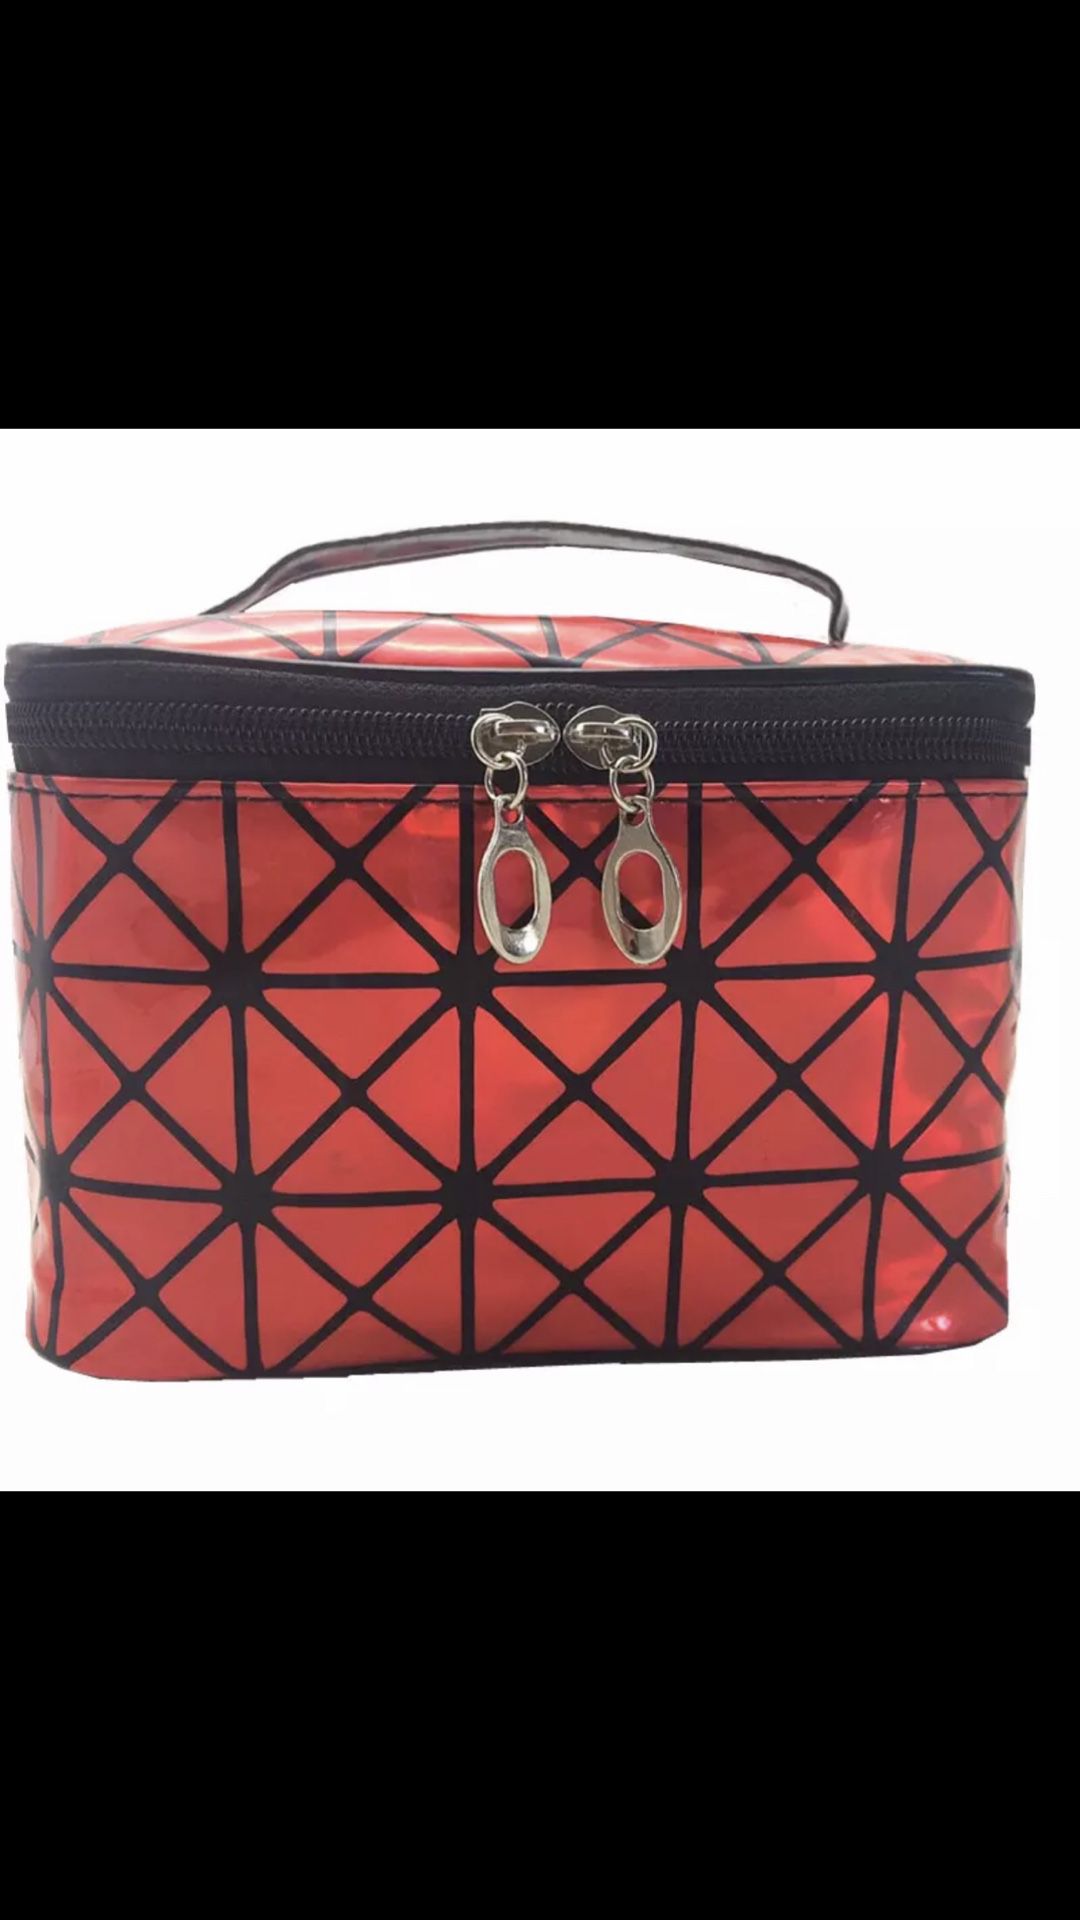 Red Cosmetics Bag, New 